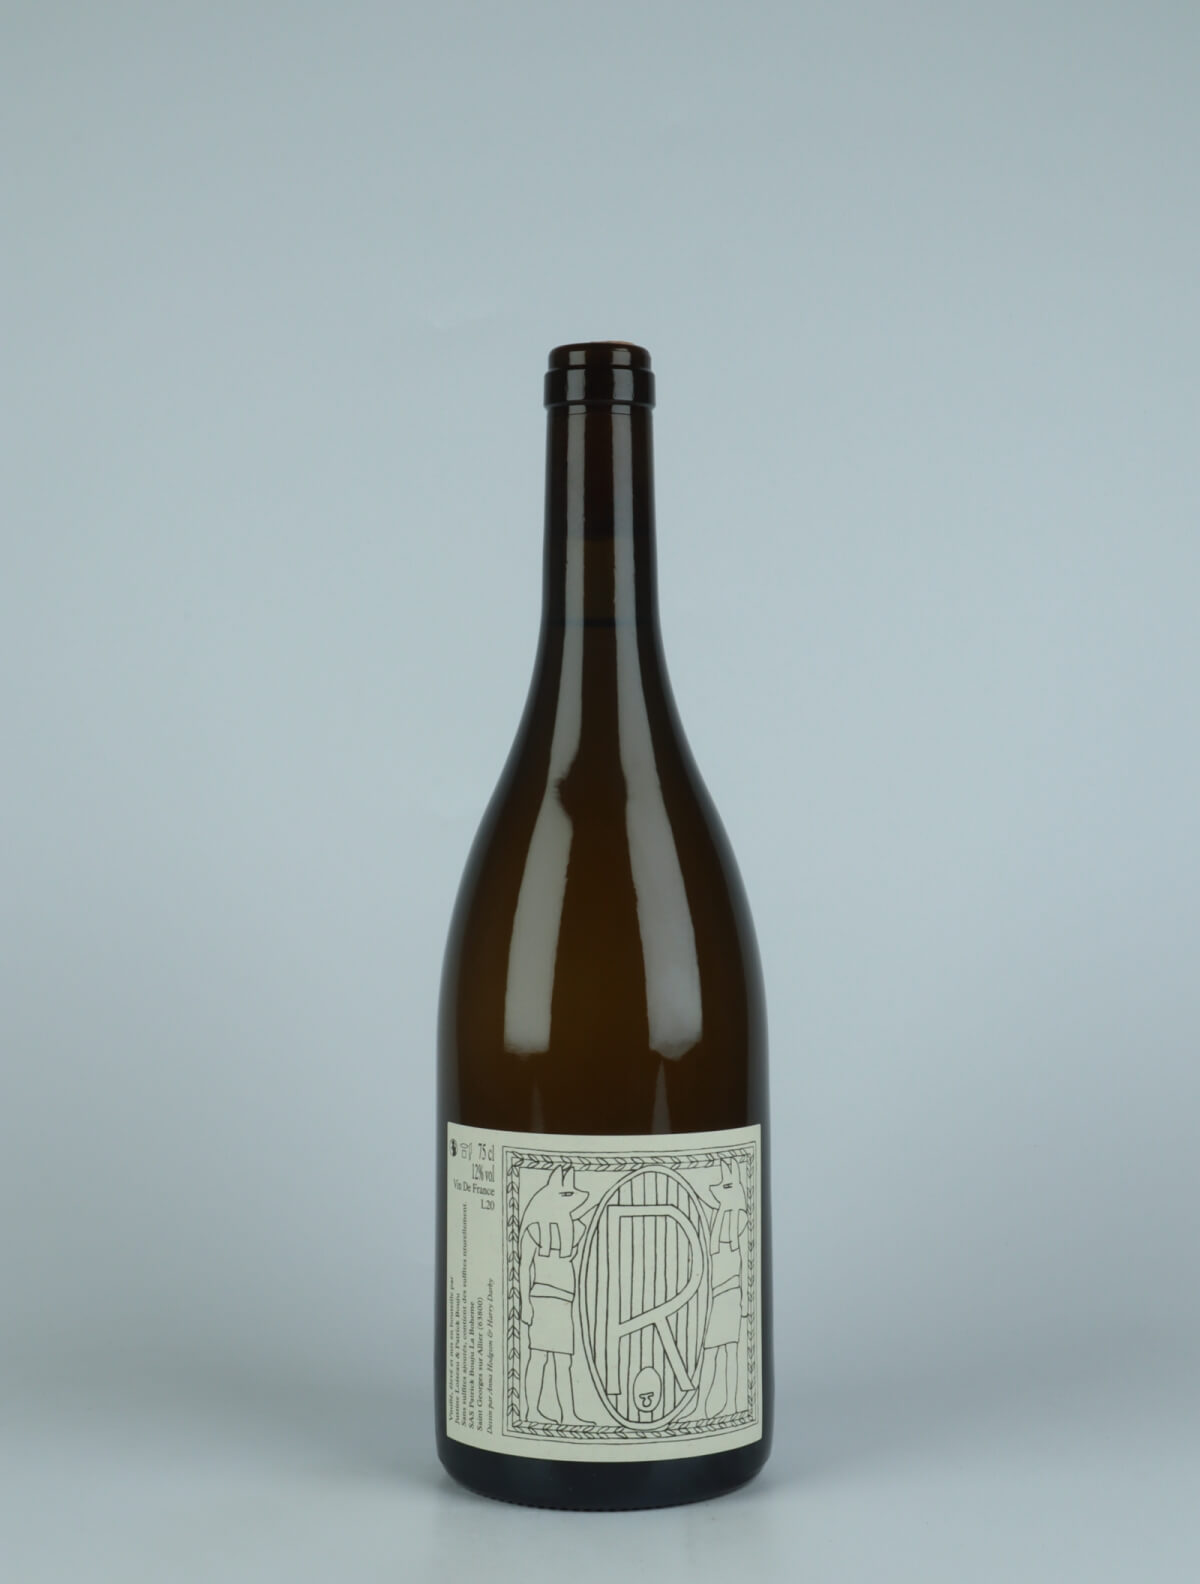 A bottle 2020 R White wine from Patrick Bouju, Auvergne in France